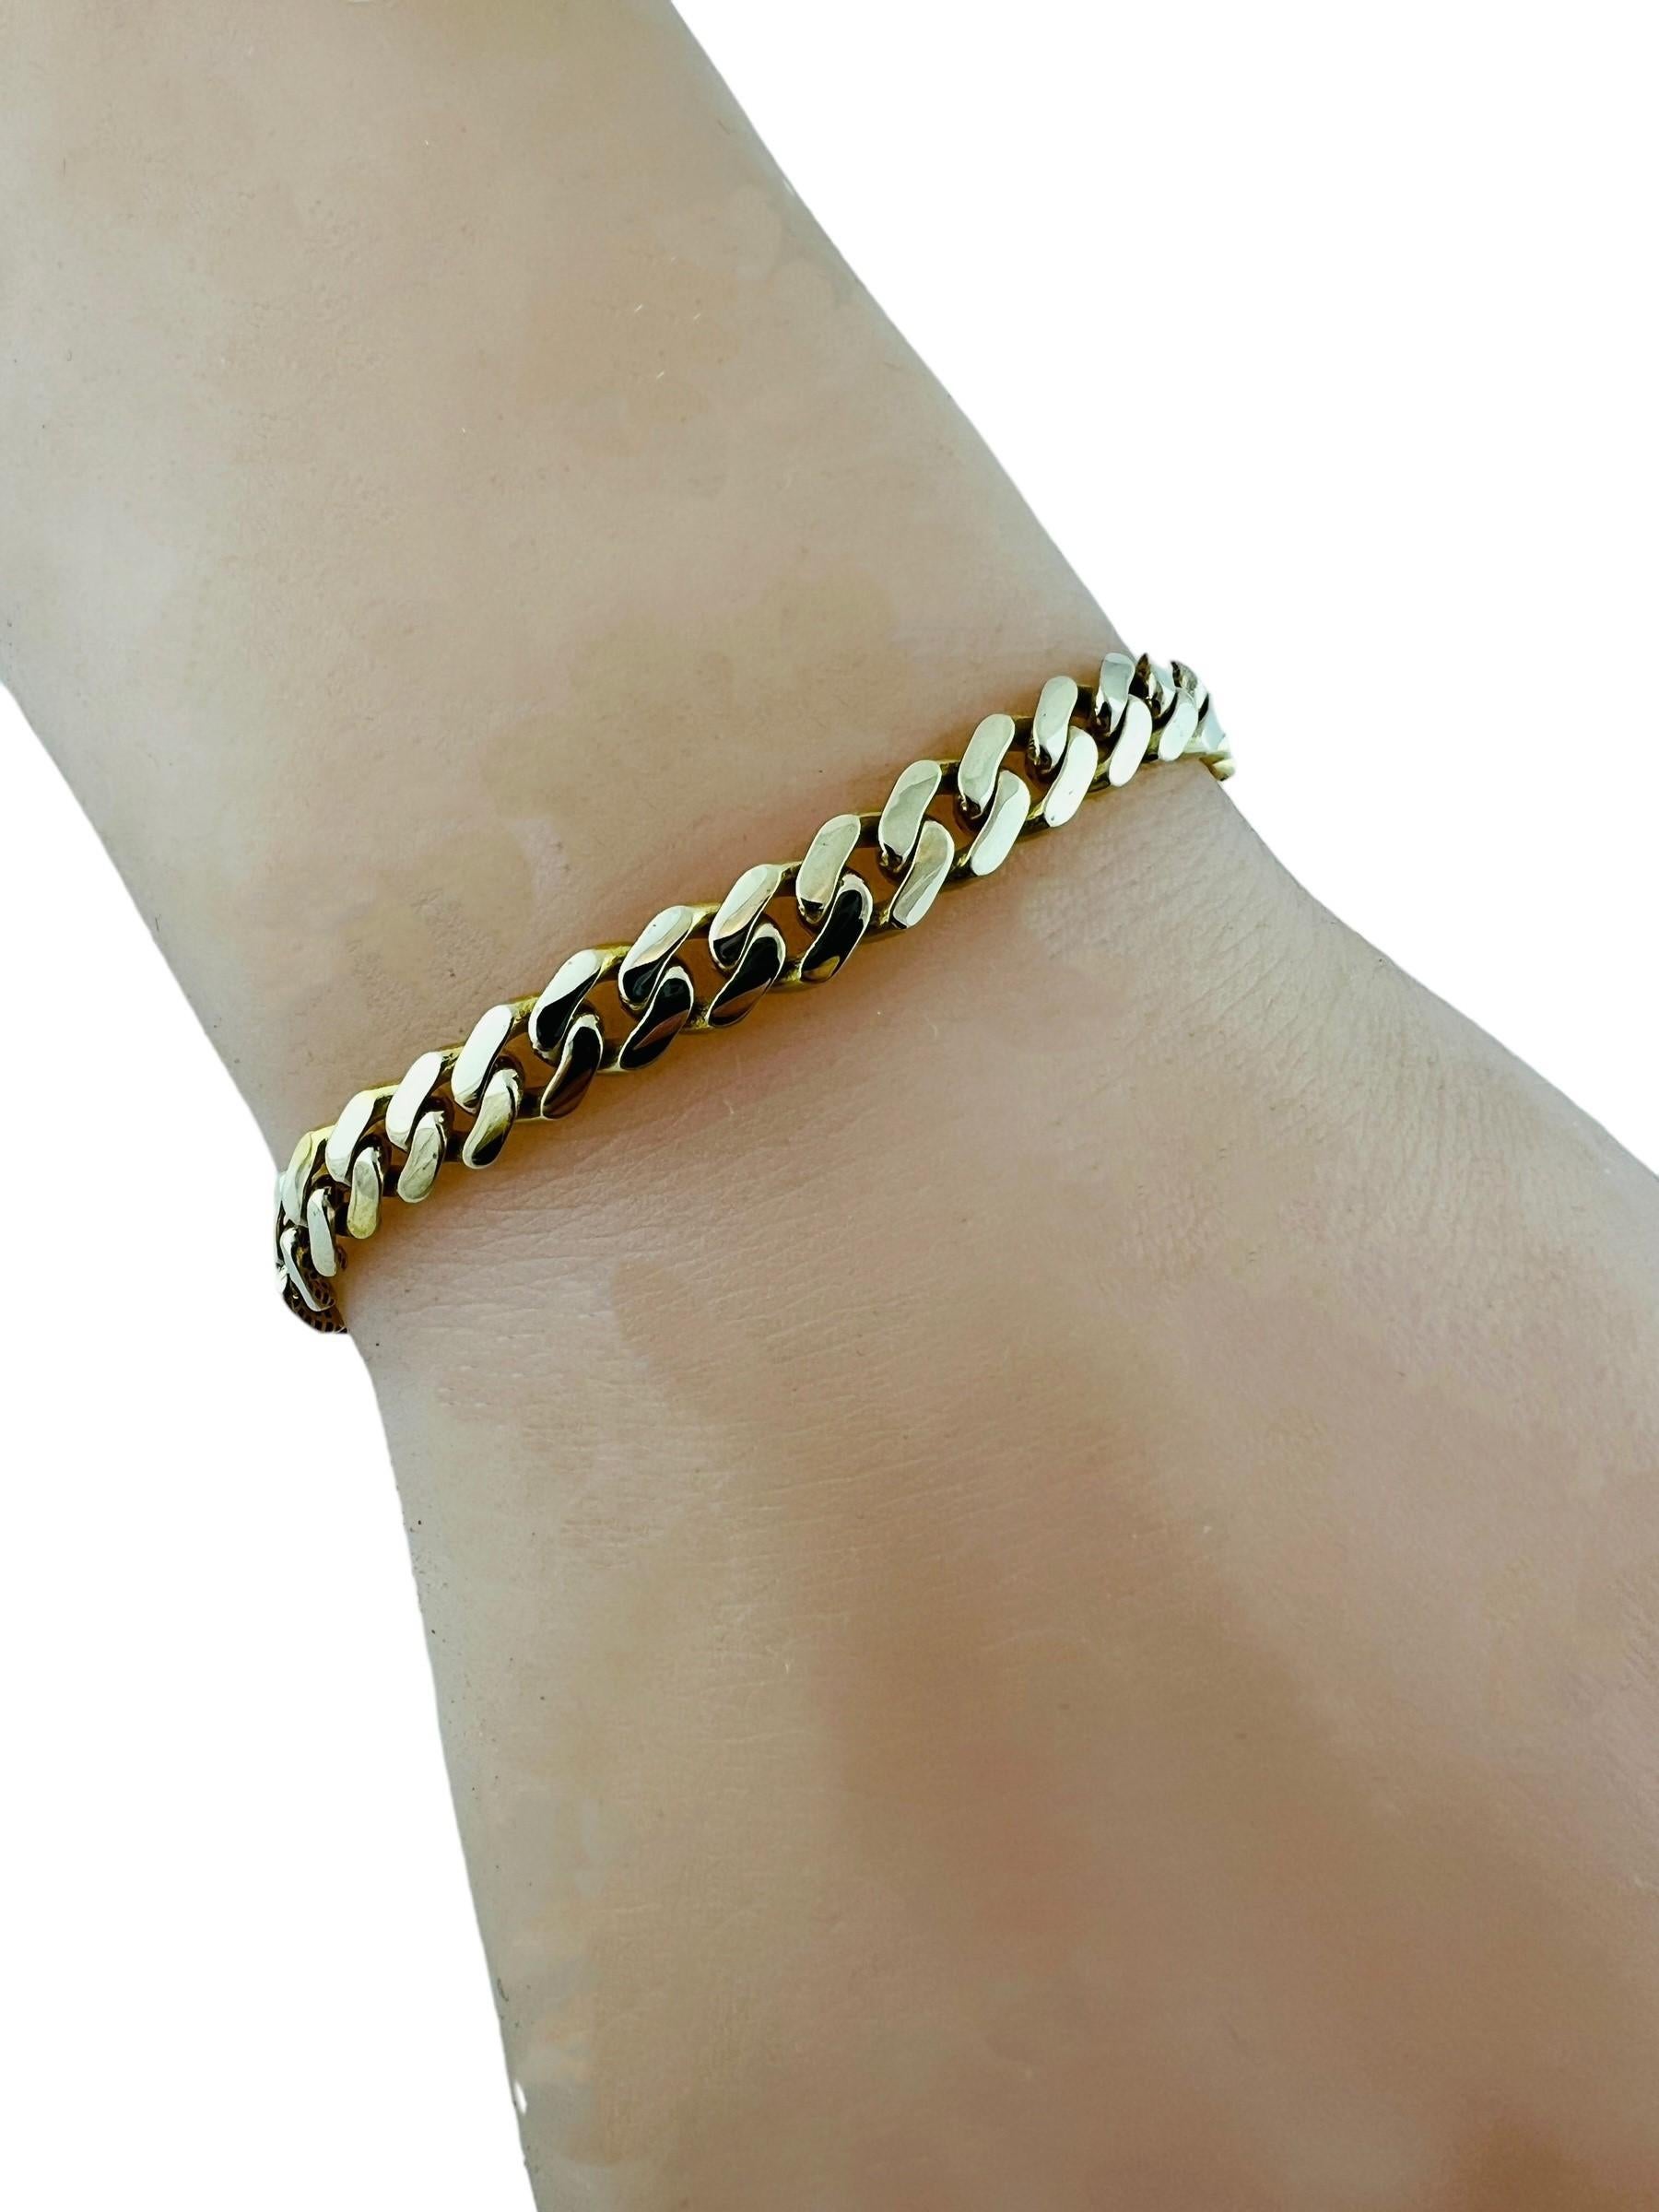 14K Yellow Gold Curb Link Chain Bracelet #17166 For Sale 4